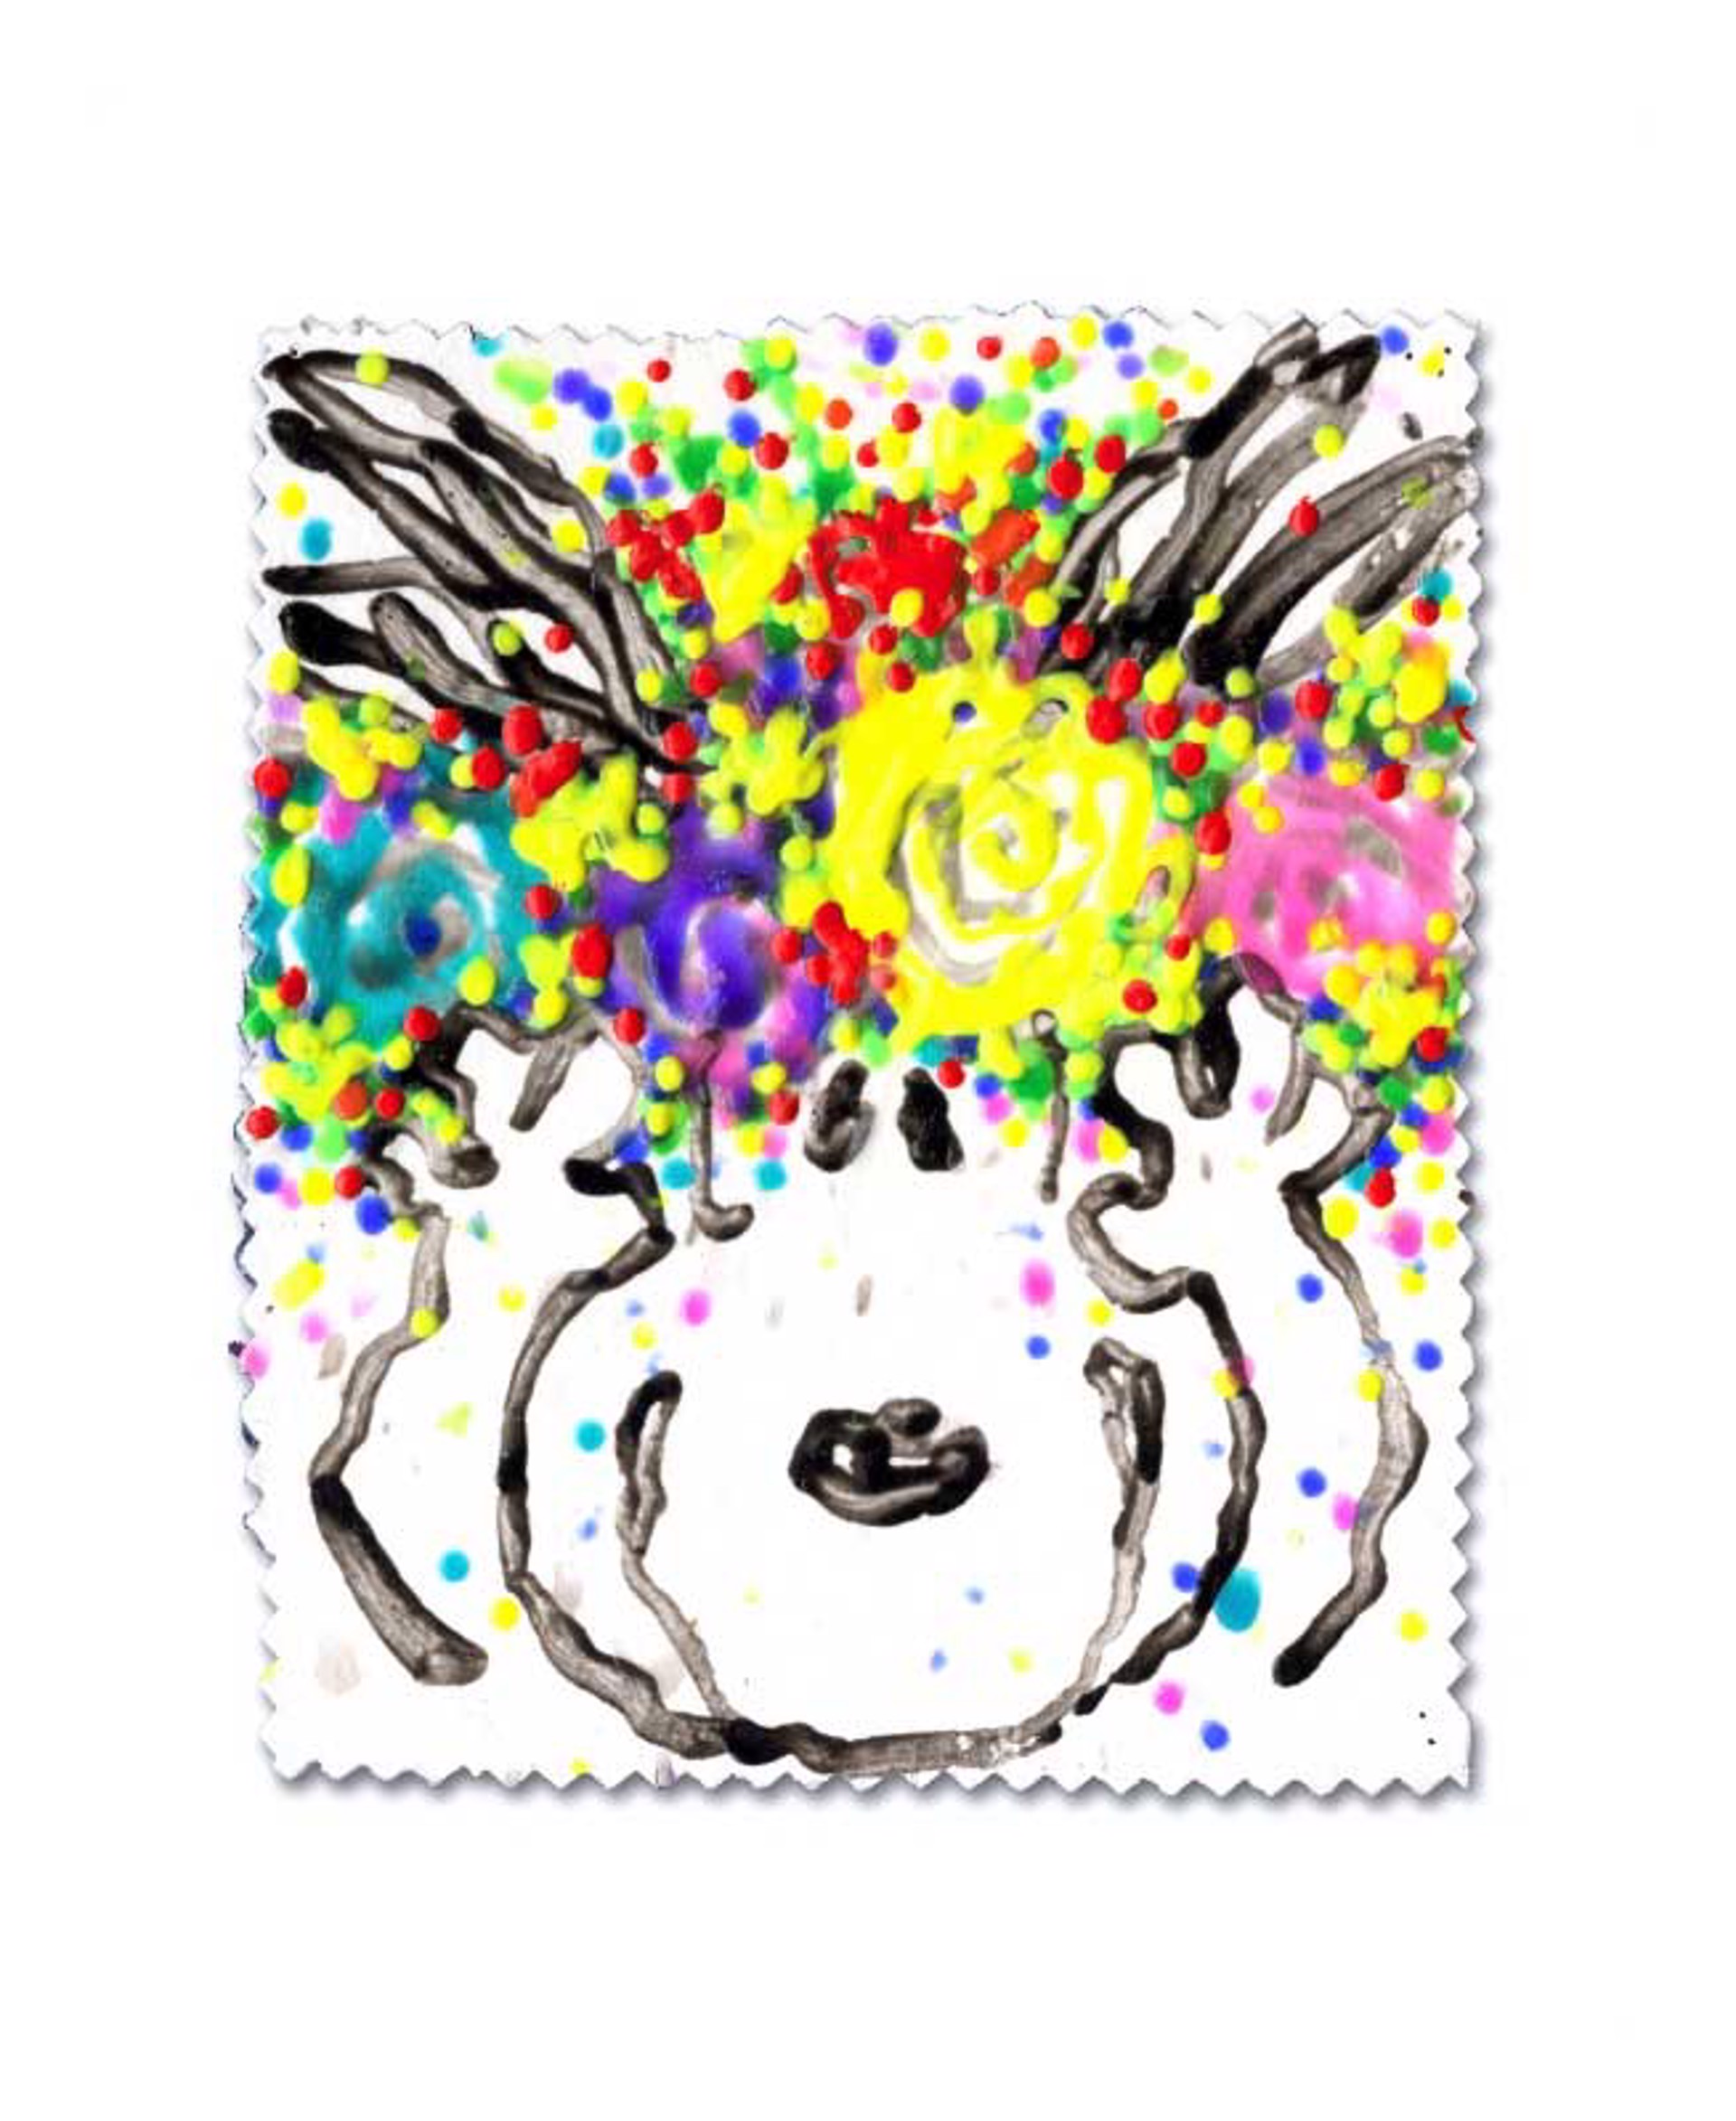 Tahitian Hipster V by Tom Everhart